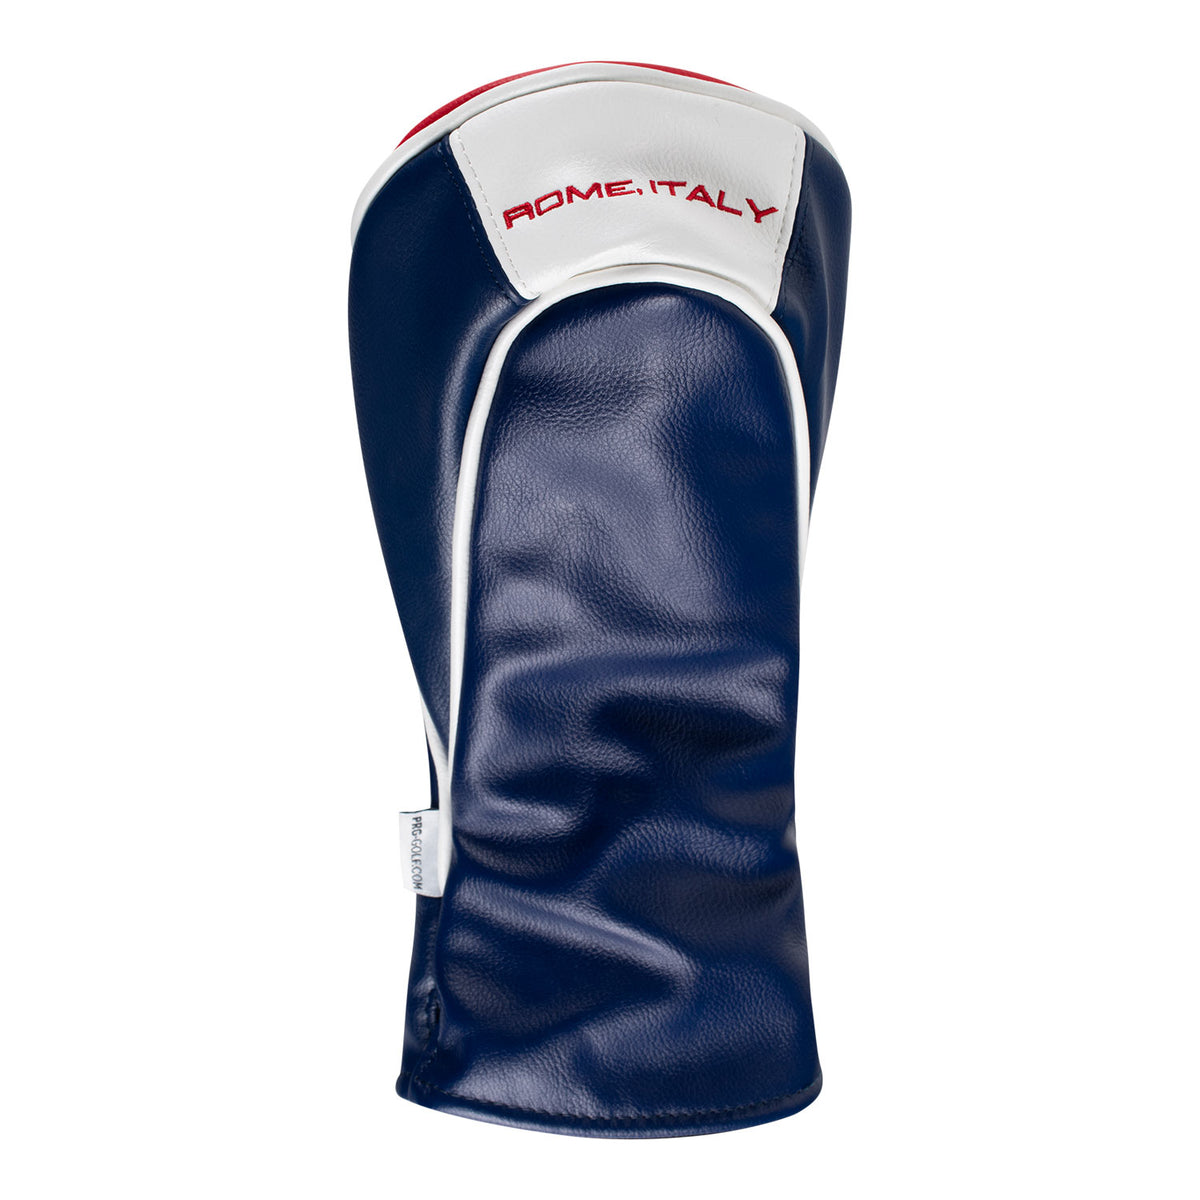 PRG 2023 Ryder Cup U.S Team Golf Collection Fairway Cover